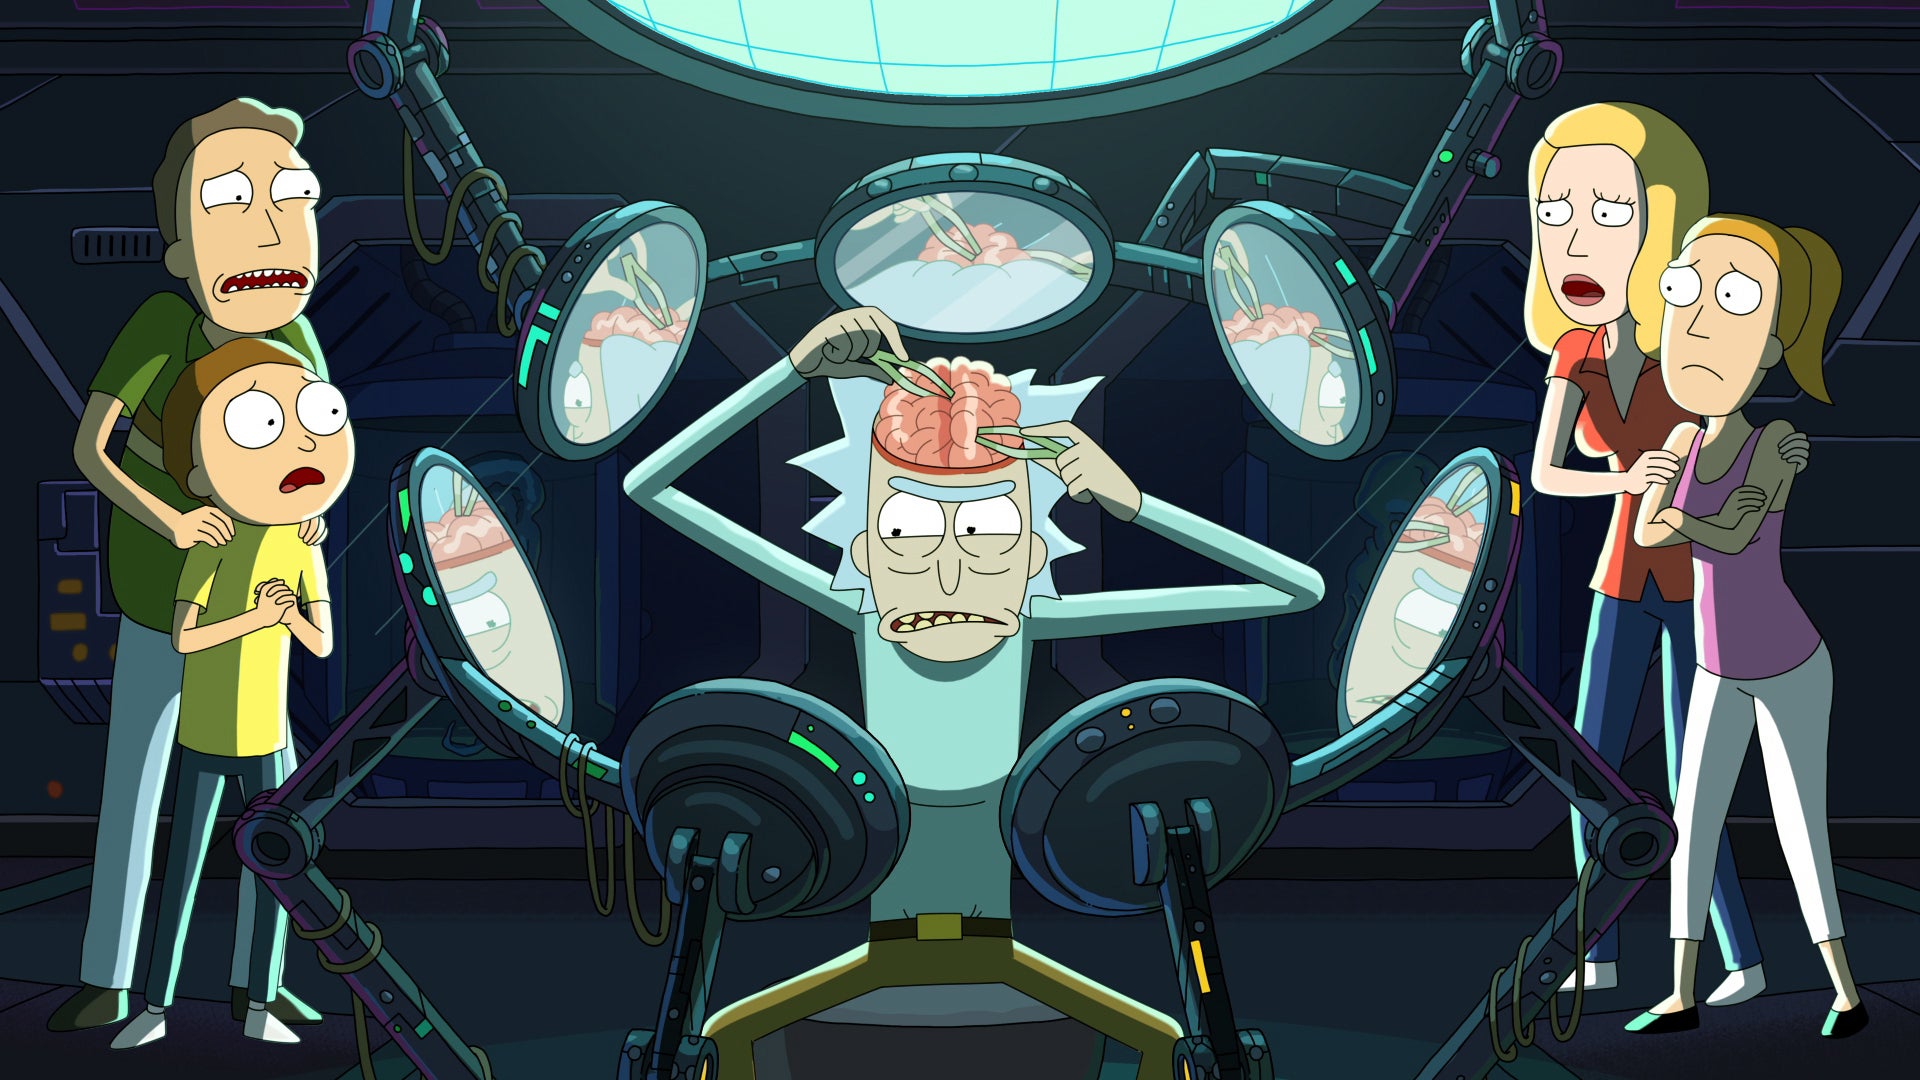 Download Summer Smith Beth Smith Jerry Smith Morty Smith Rick Sanchez Tv Show Rick And Morty Hd 3076